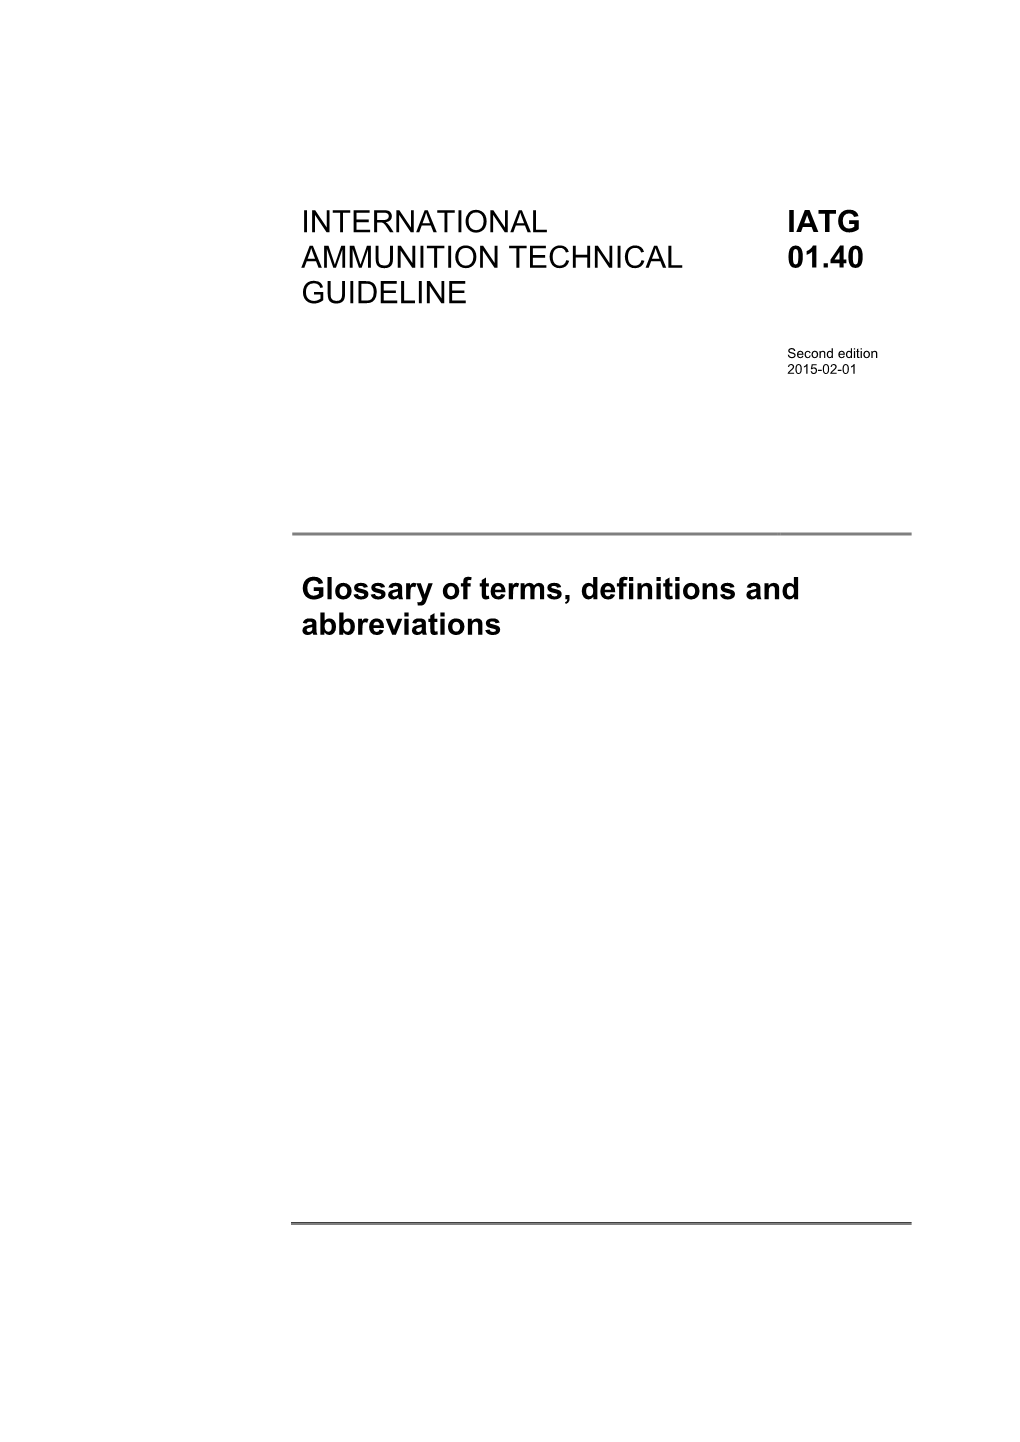 IATG 01.40 Glossary and Definitions